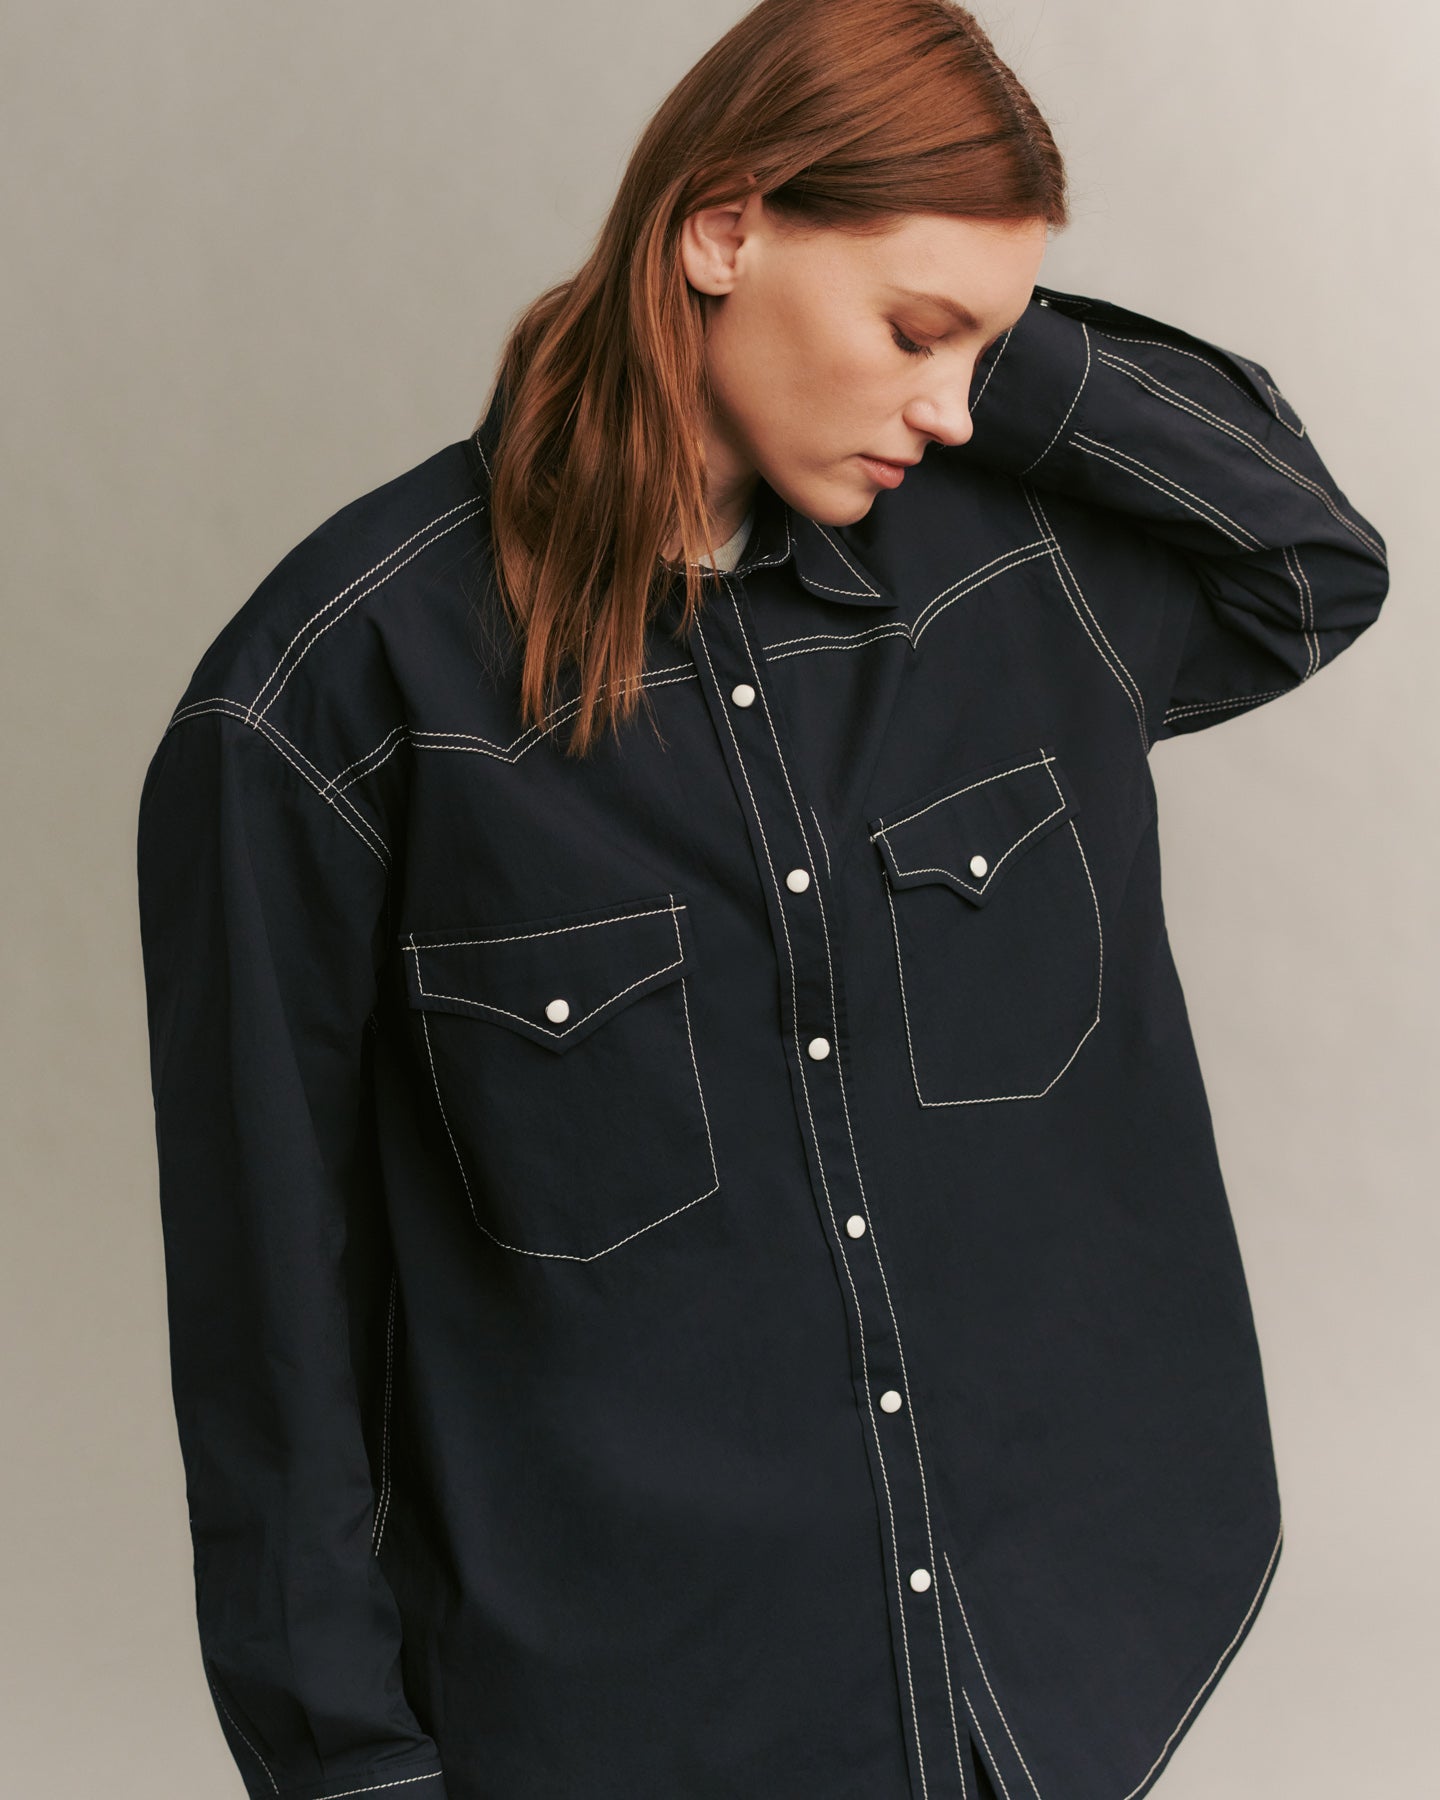 TWP Midnight Dutton Shirt in Stretch Compact Cotton view 2